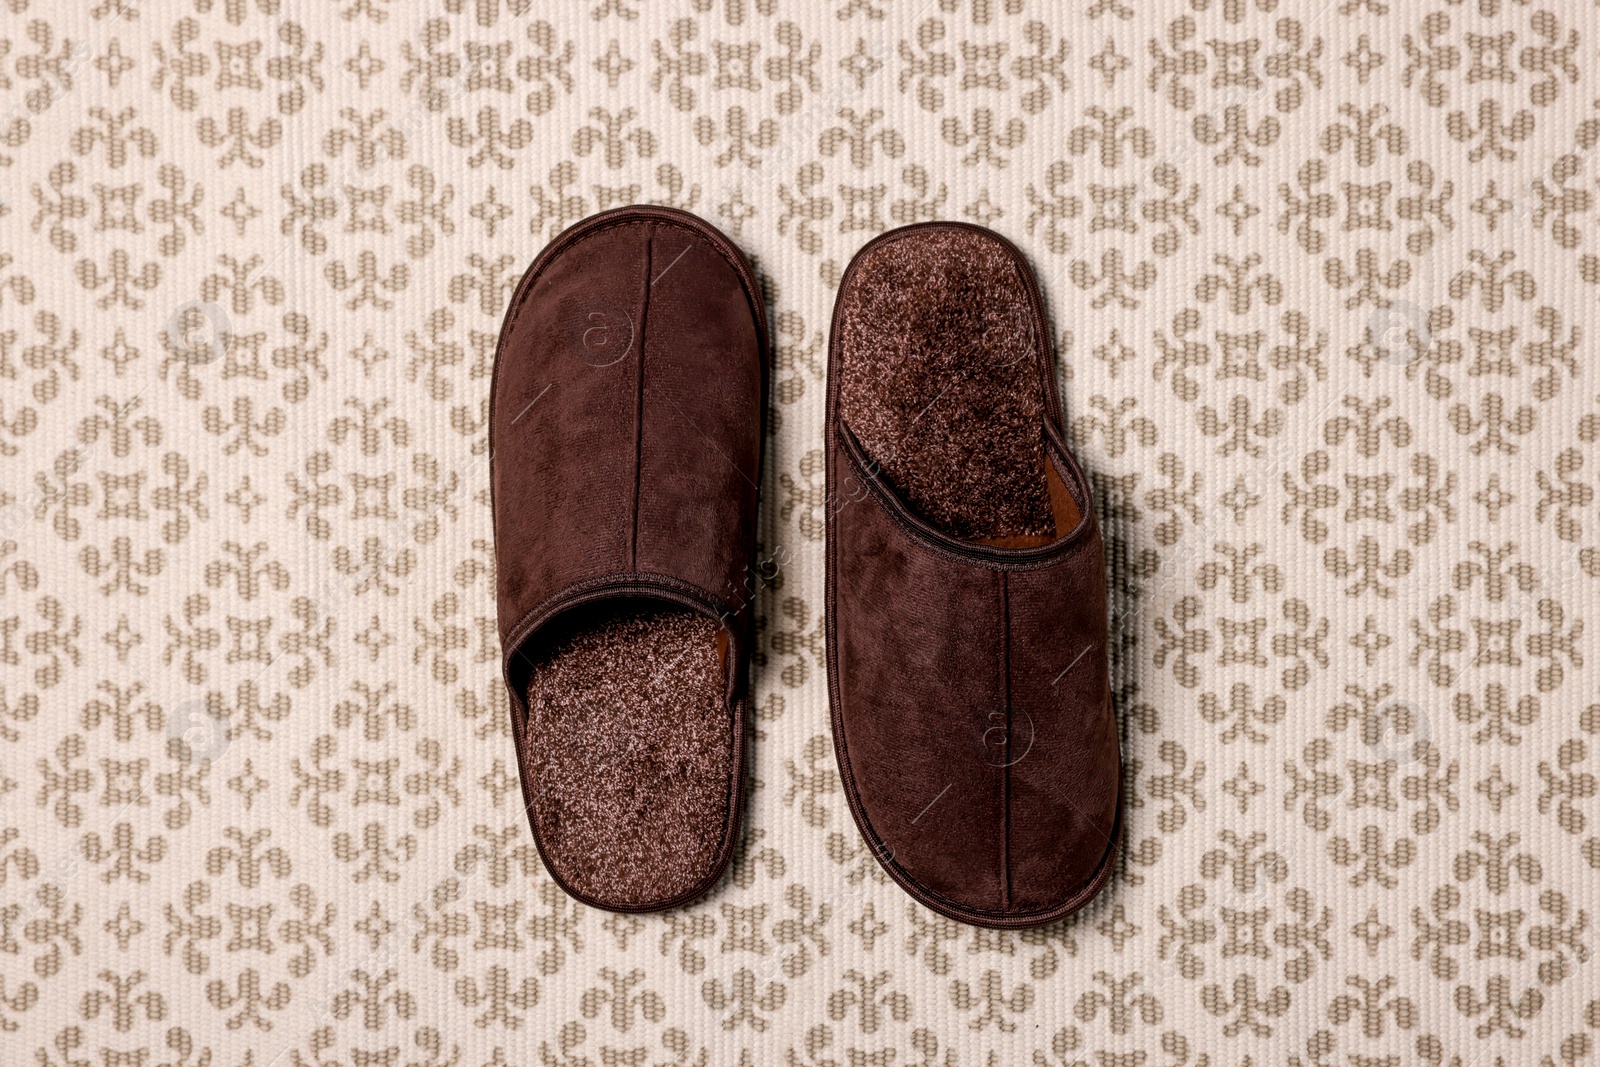 Photo of Brown slippers on patterned carpet, top view